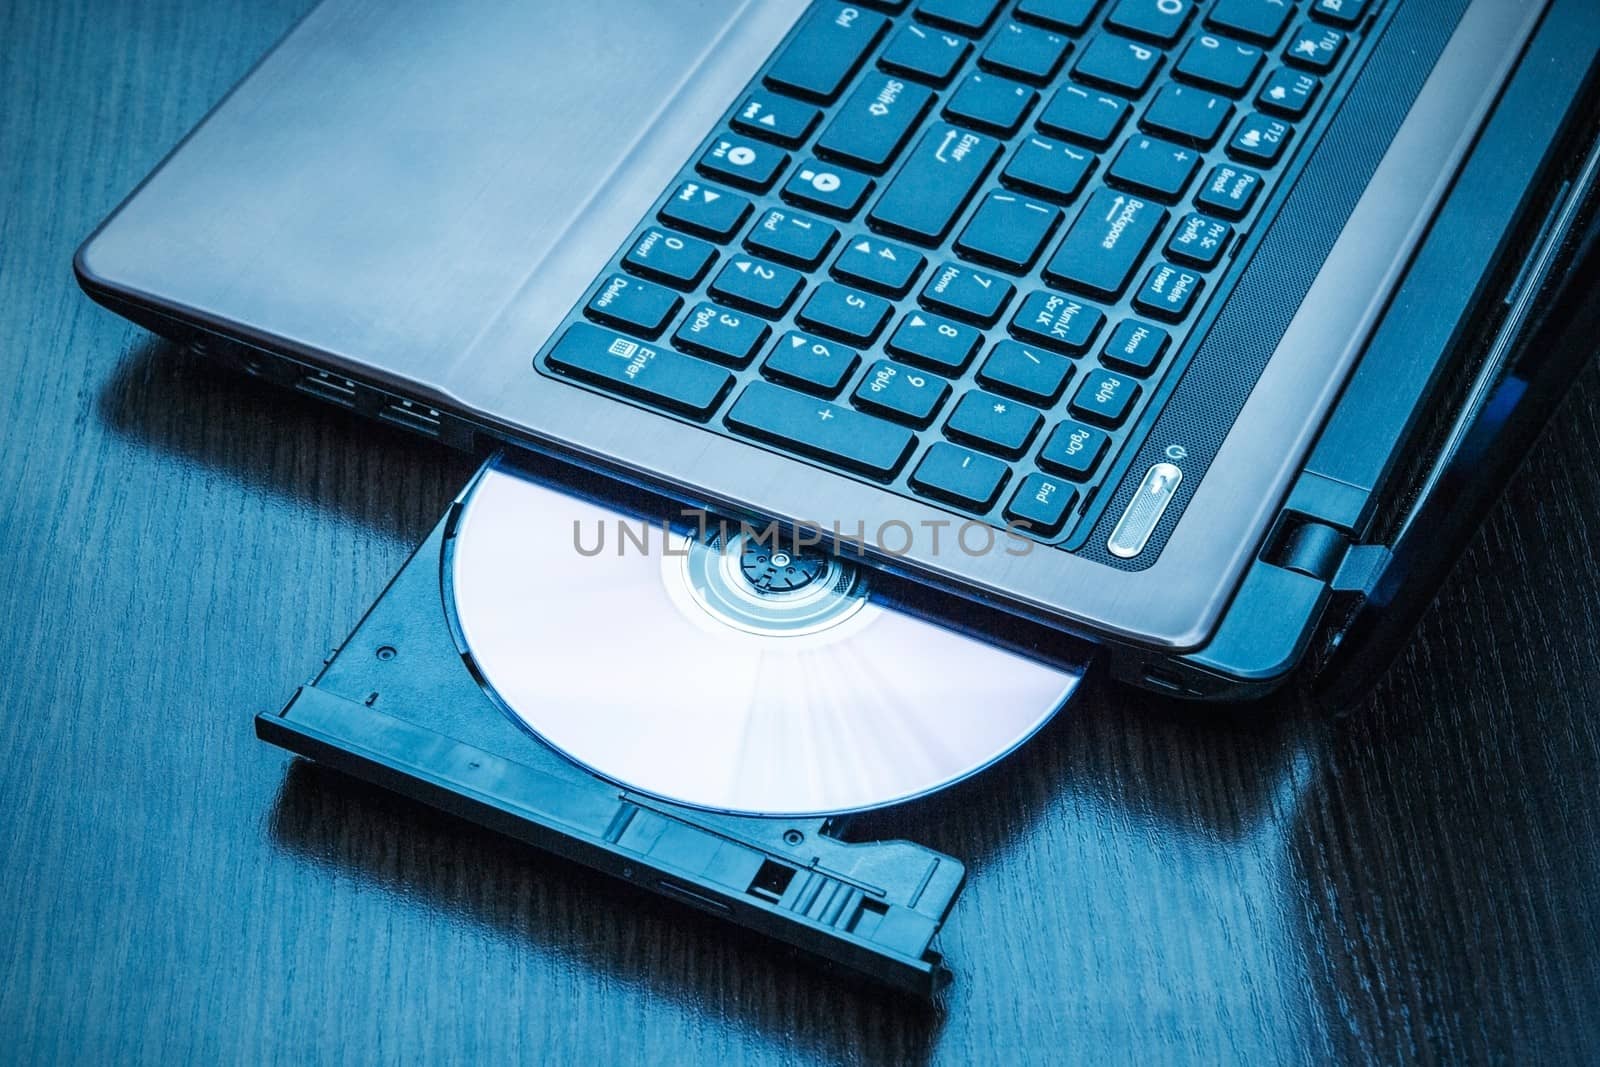 Laptop with open CD - DVD drive. Abstract light composition